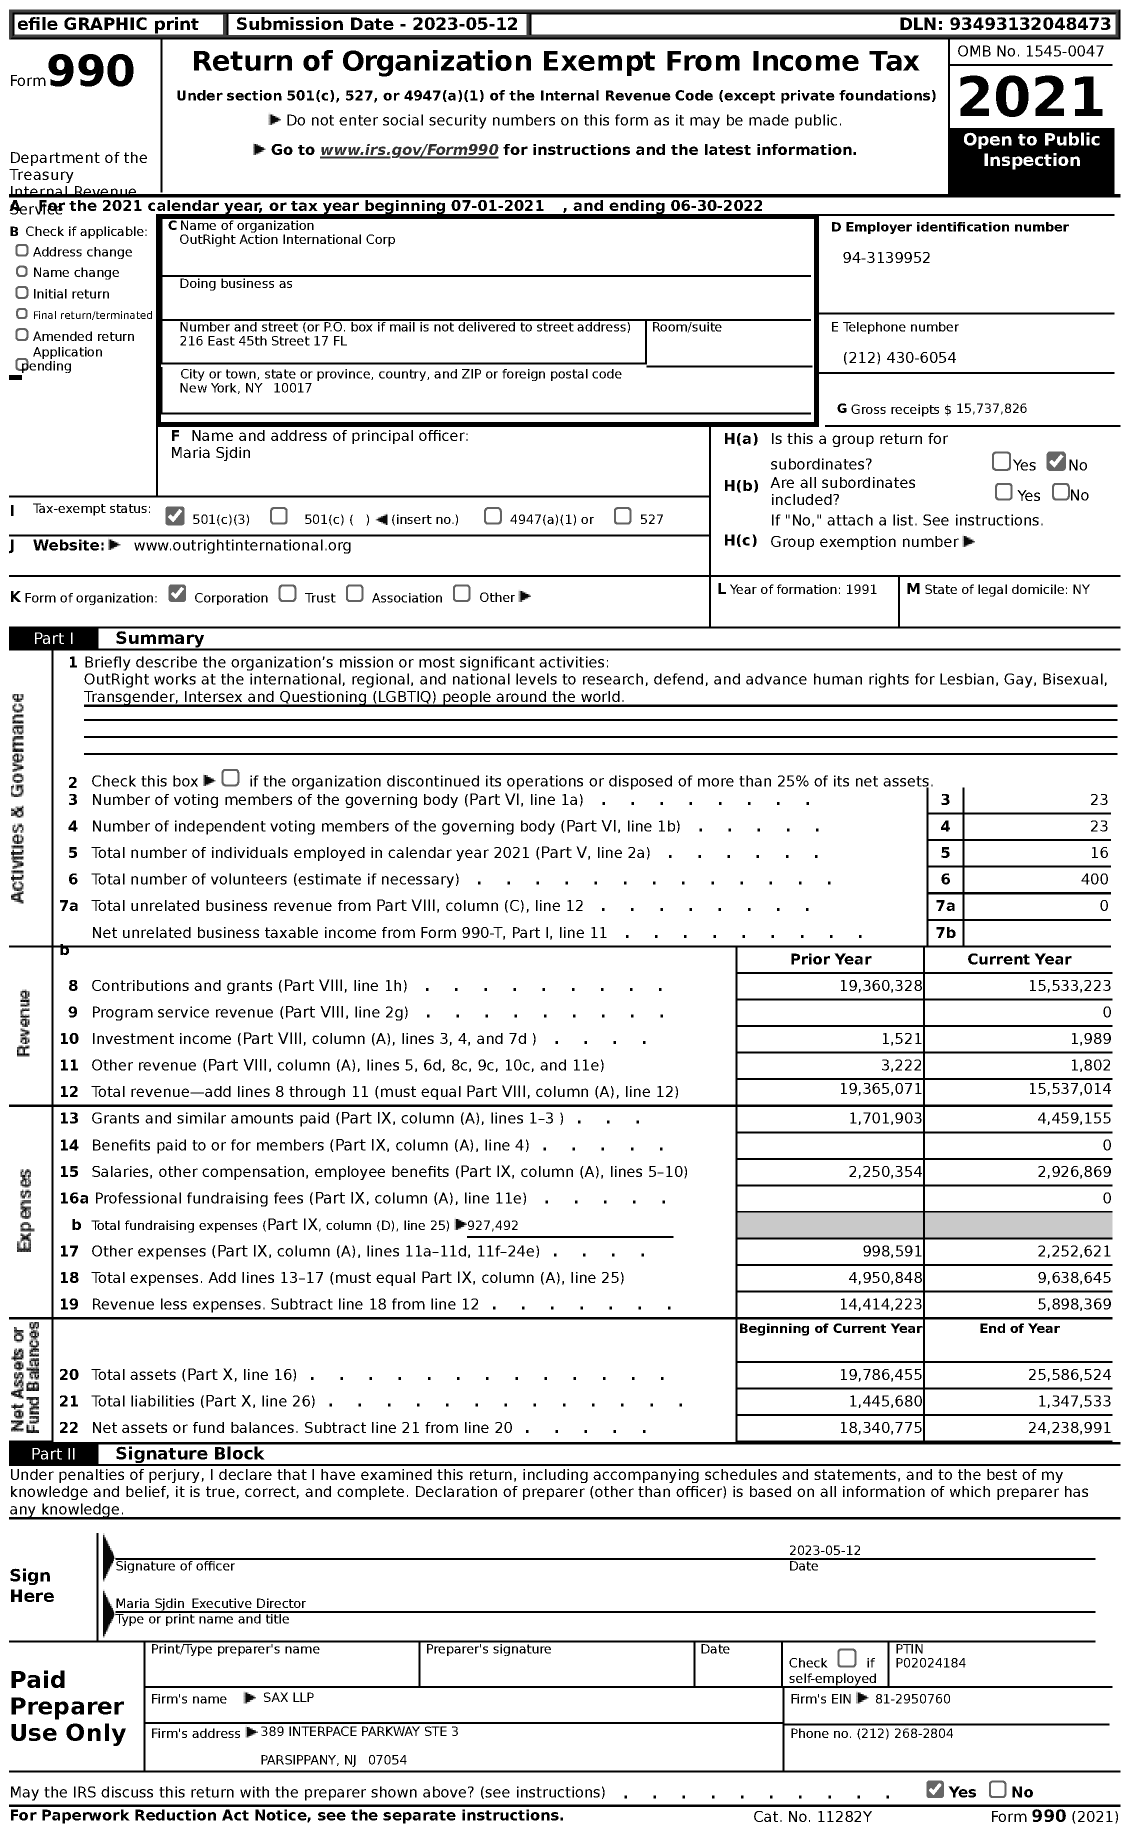 Image of first page of 2021 Form 990 for OutRight Action International Corp